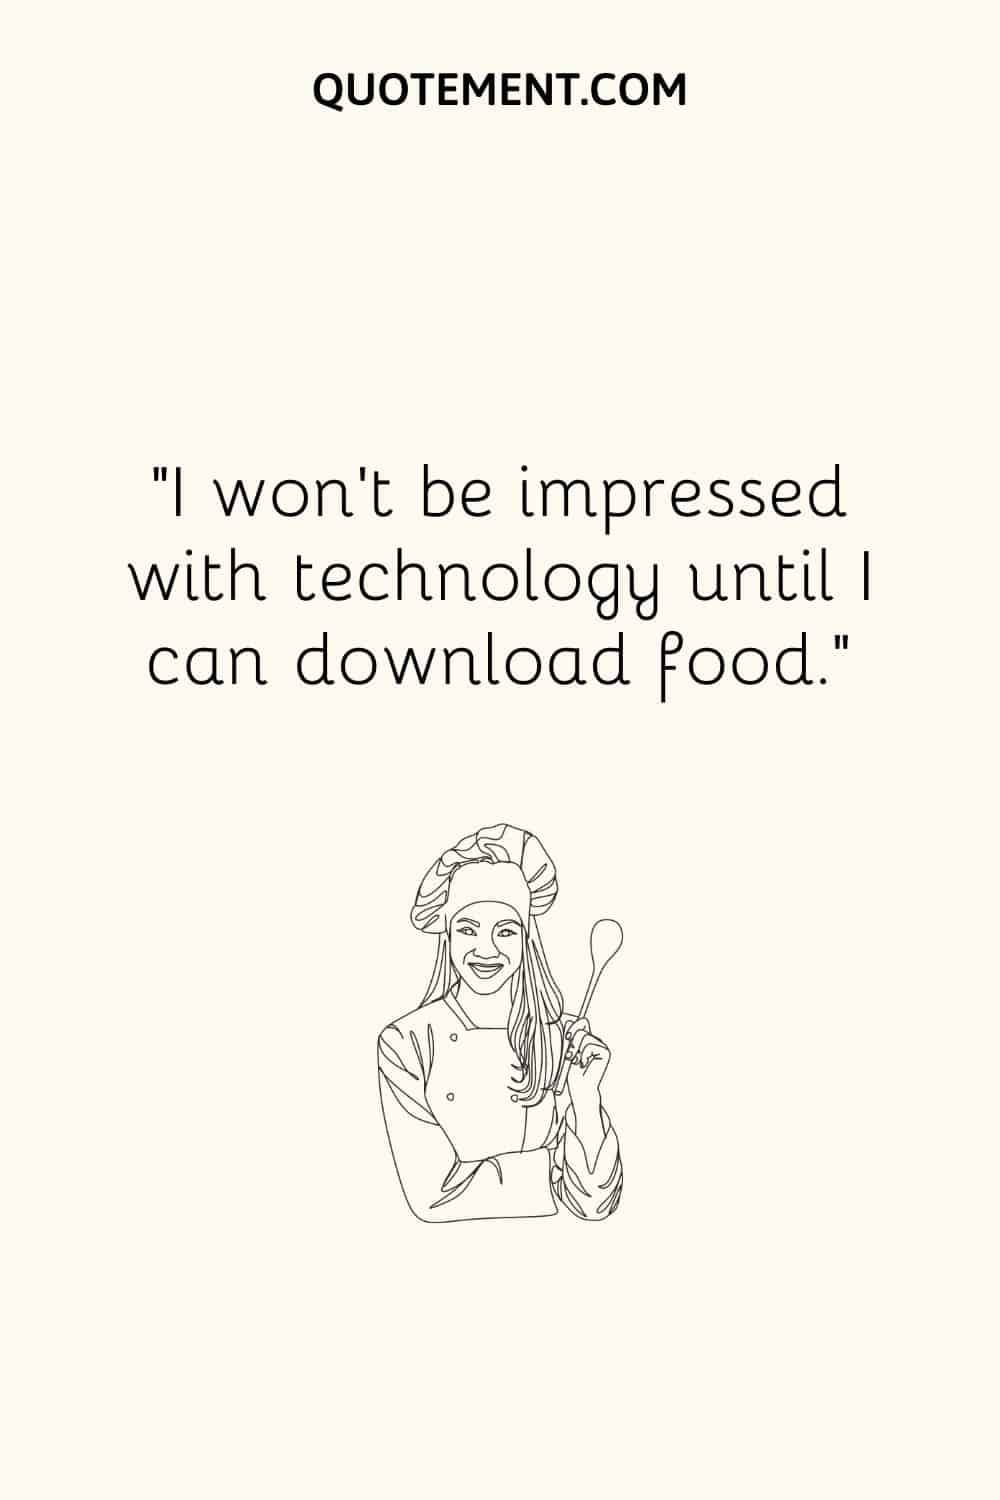 Illustration of a cook and a funny kitchen quote.